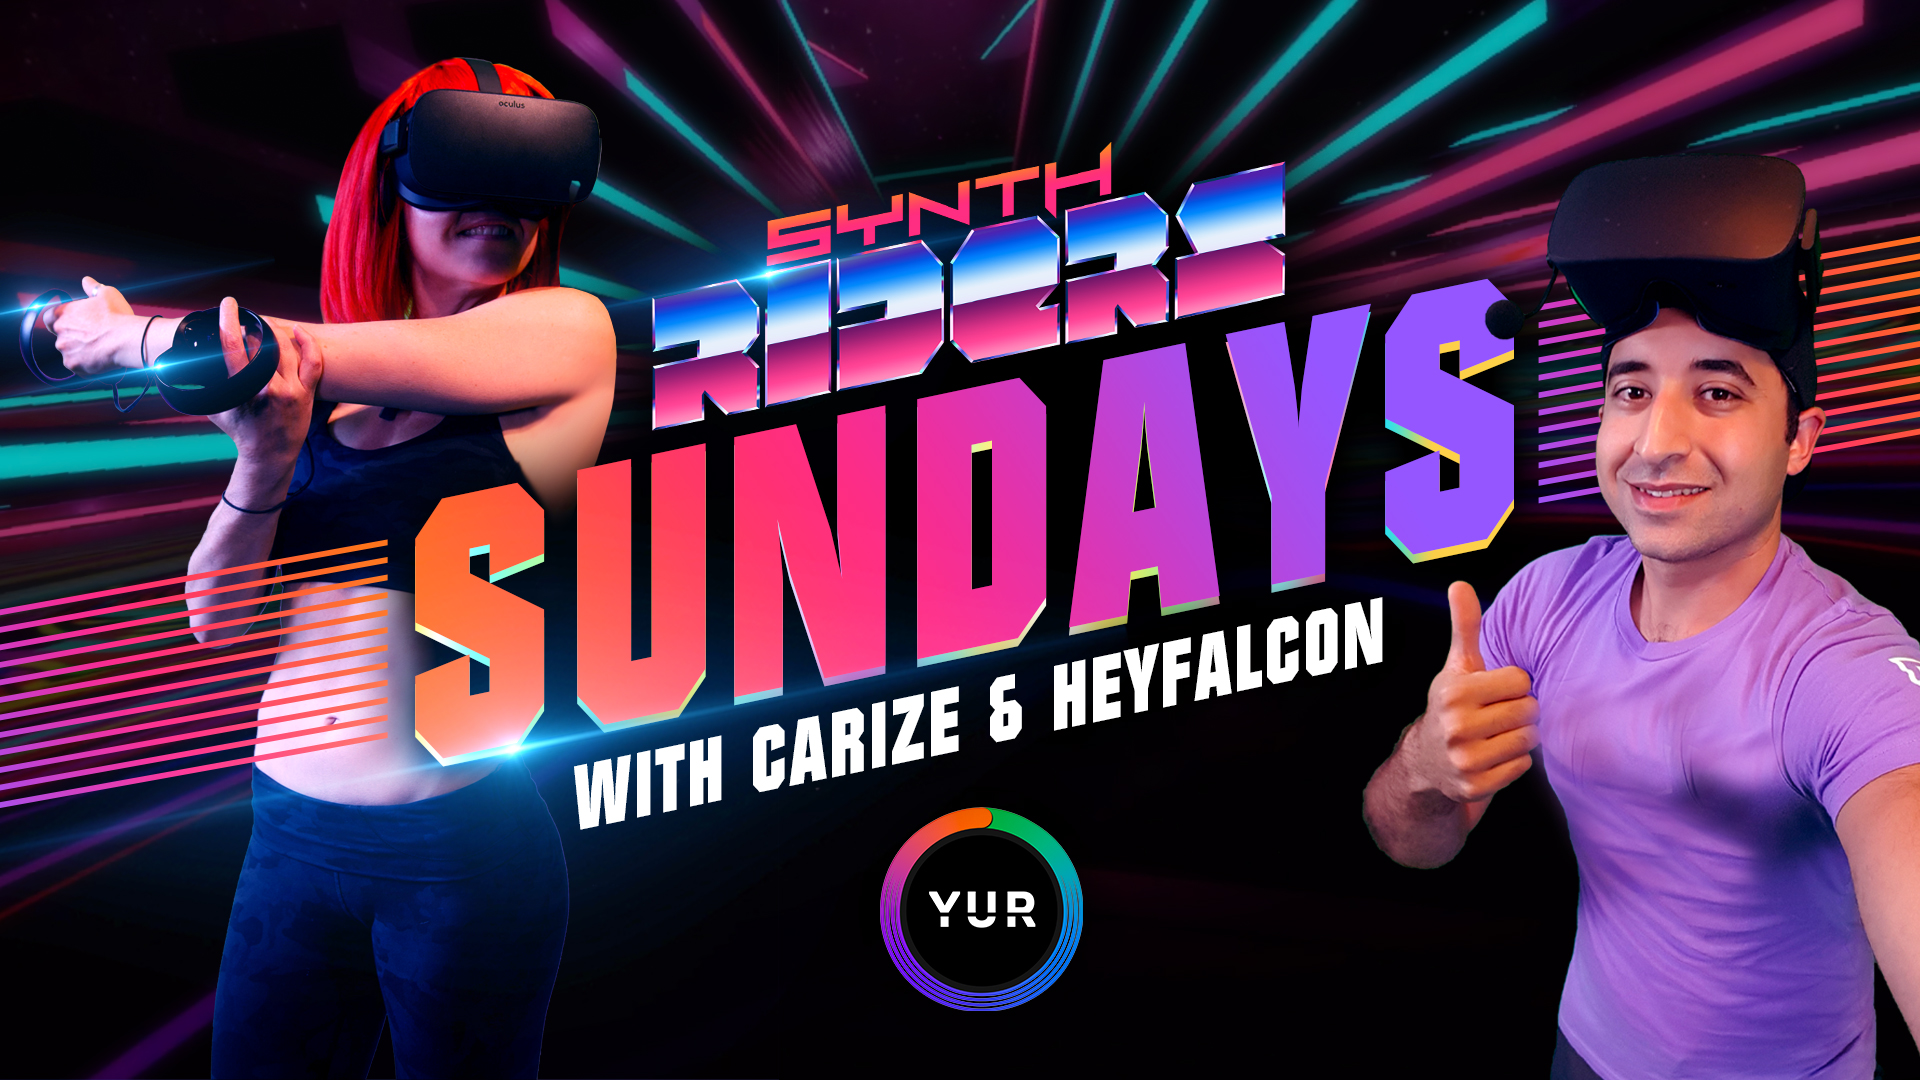 Synth Sundays Fitness Events